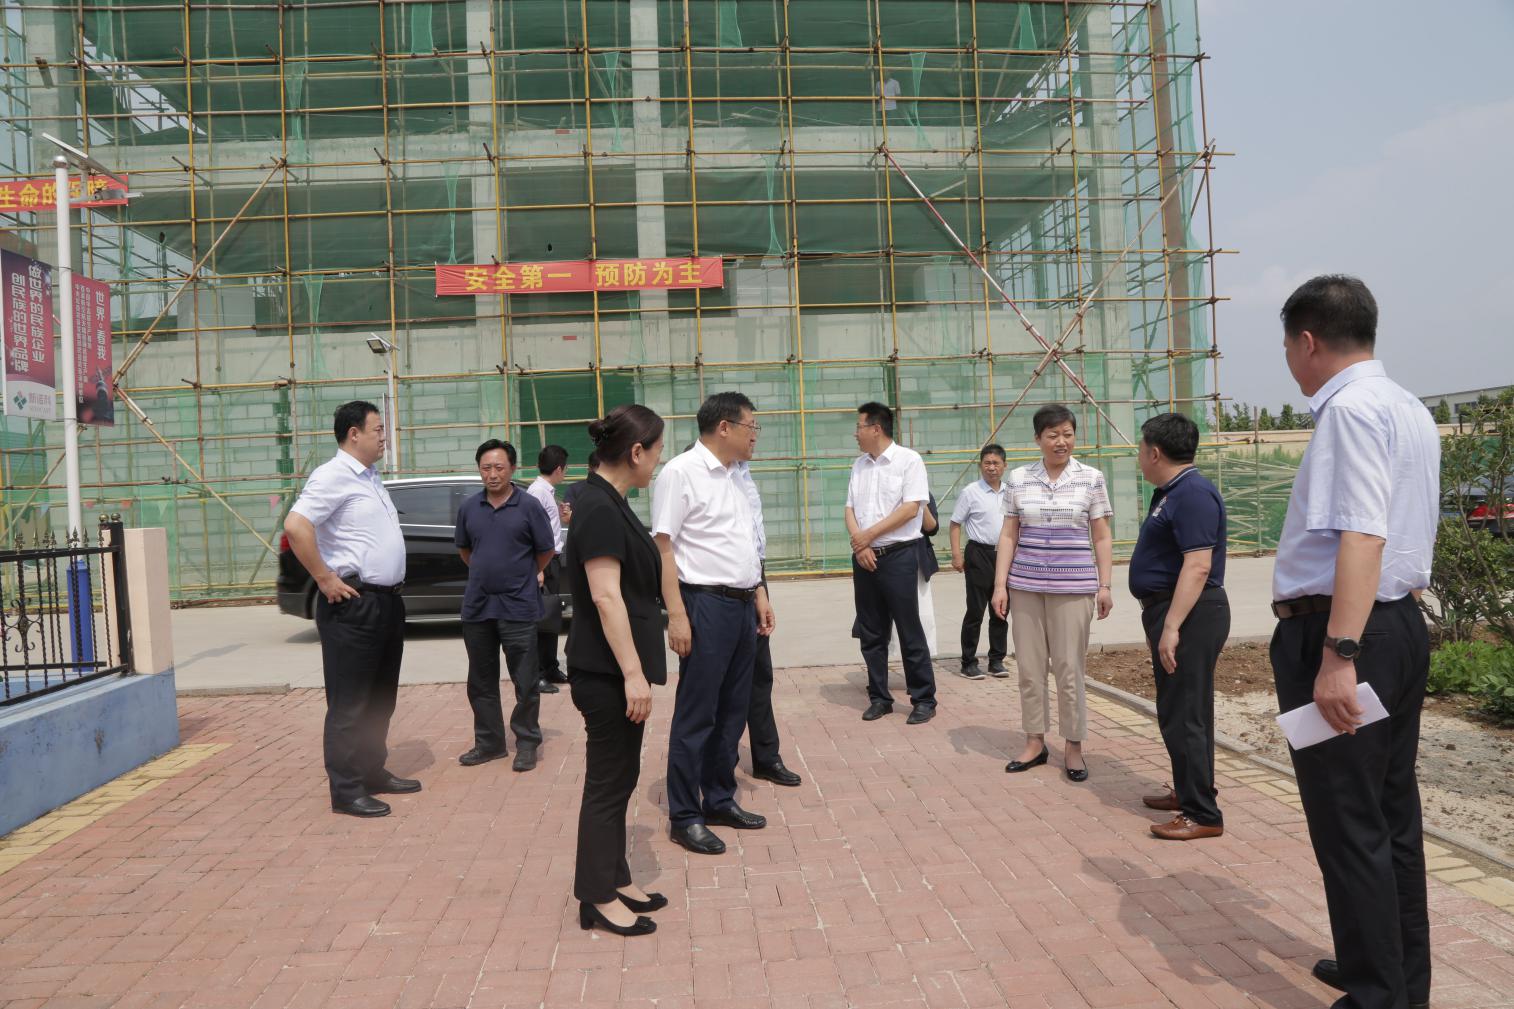 Leaders of Shandong Disabled Persons' Federation investigated Xinnuoke.